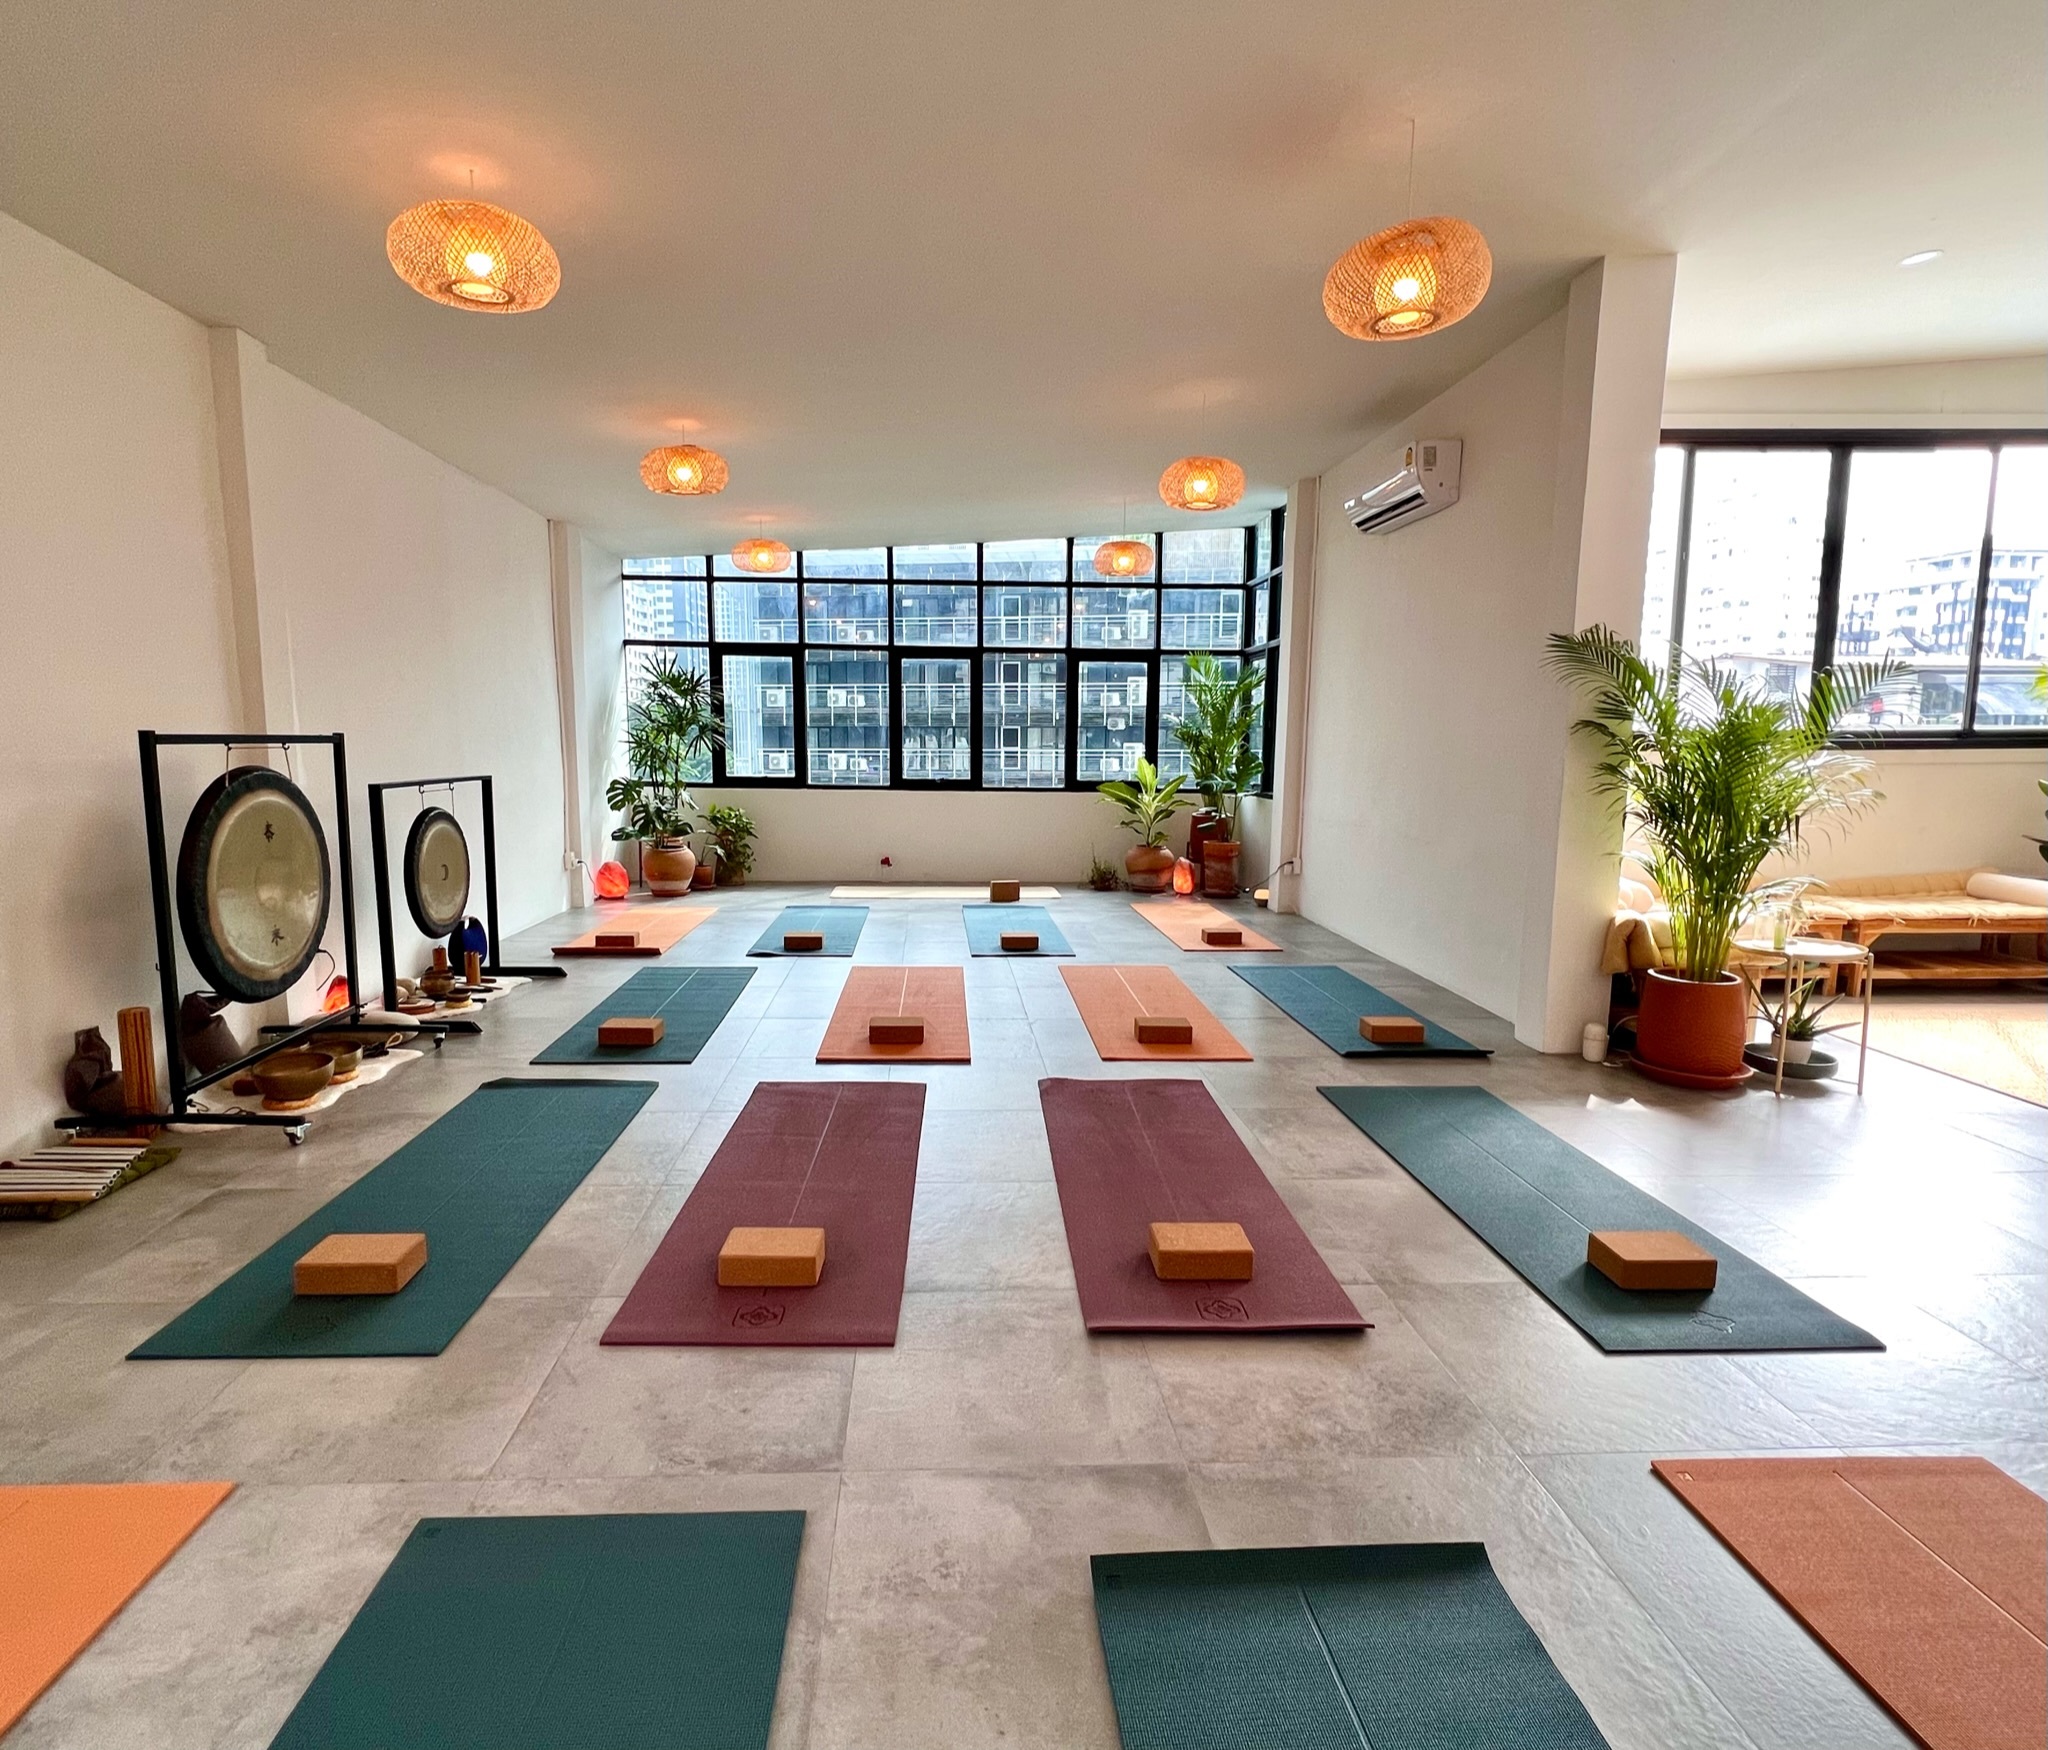 Yoga Centre London, Welcome